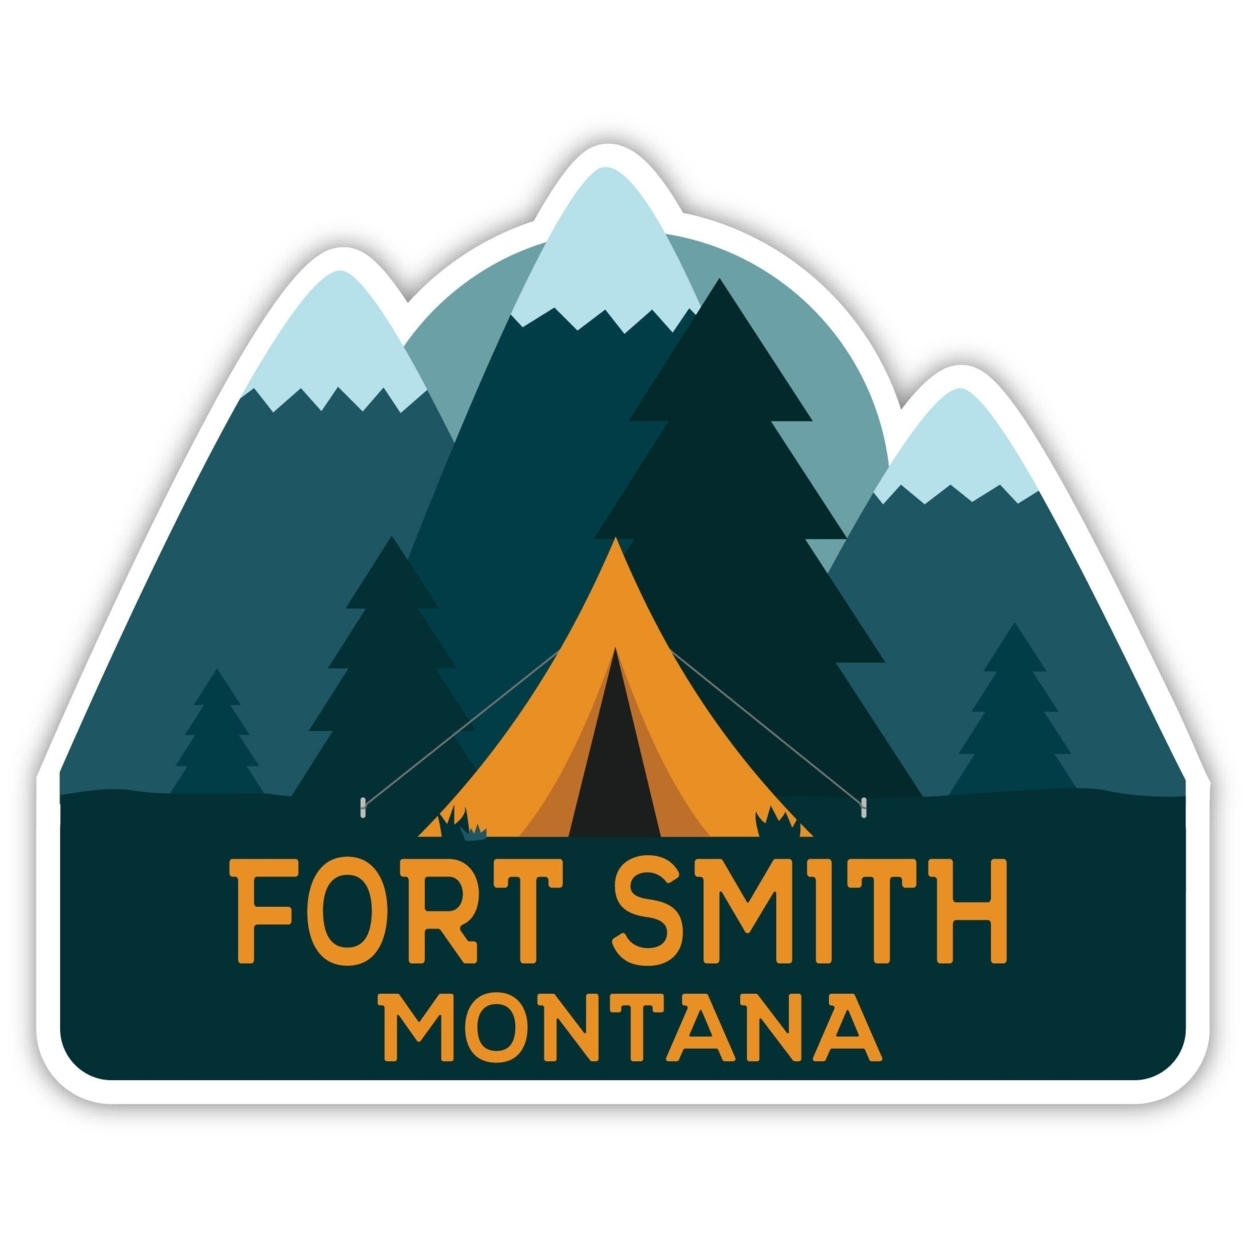 Fort Smith Montana Souvenir Decorative Stickers (Choose Theme And Size) - 4-Pack, 12-Inch, Bear